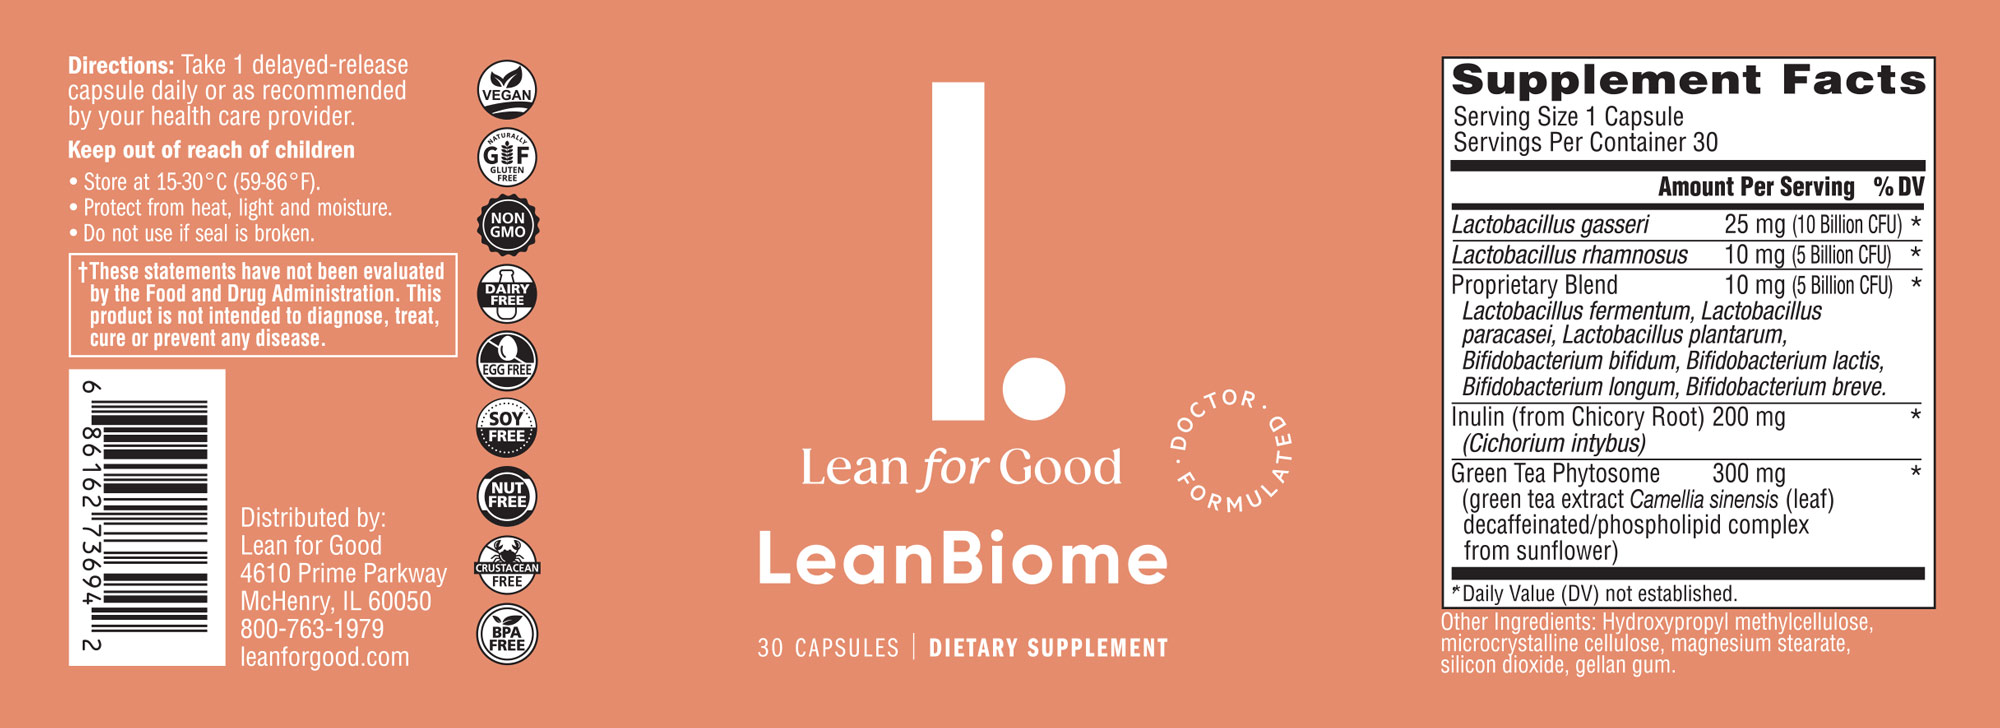 LeanBiome Supplement Fact